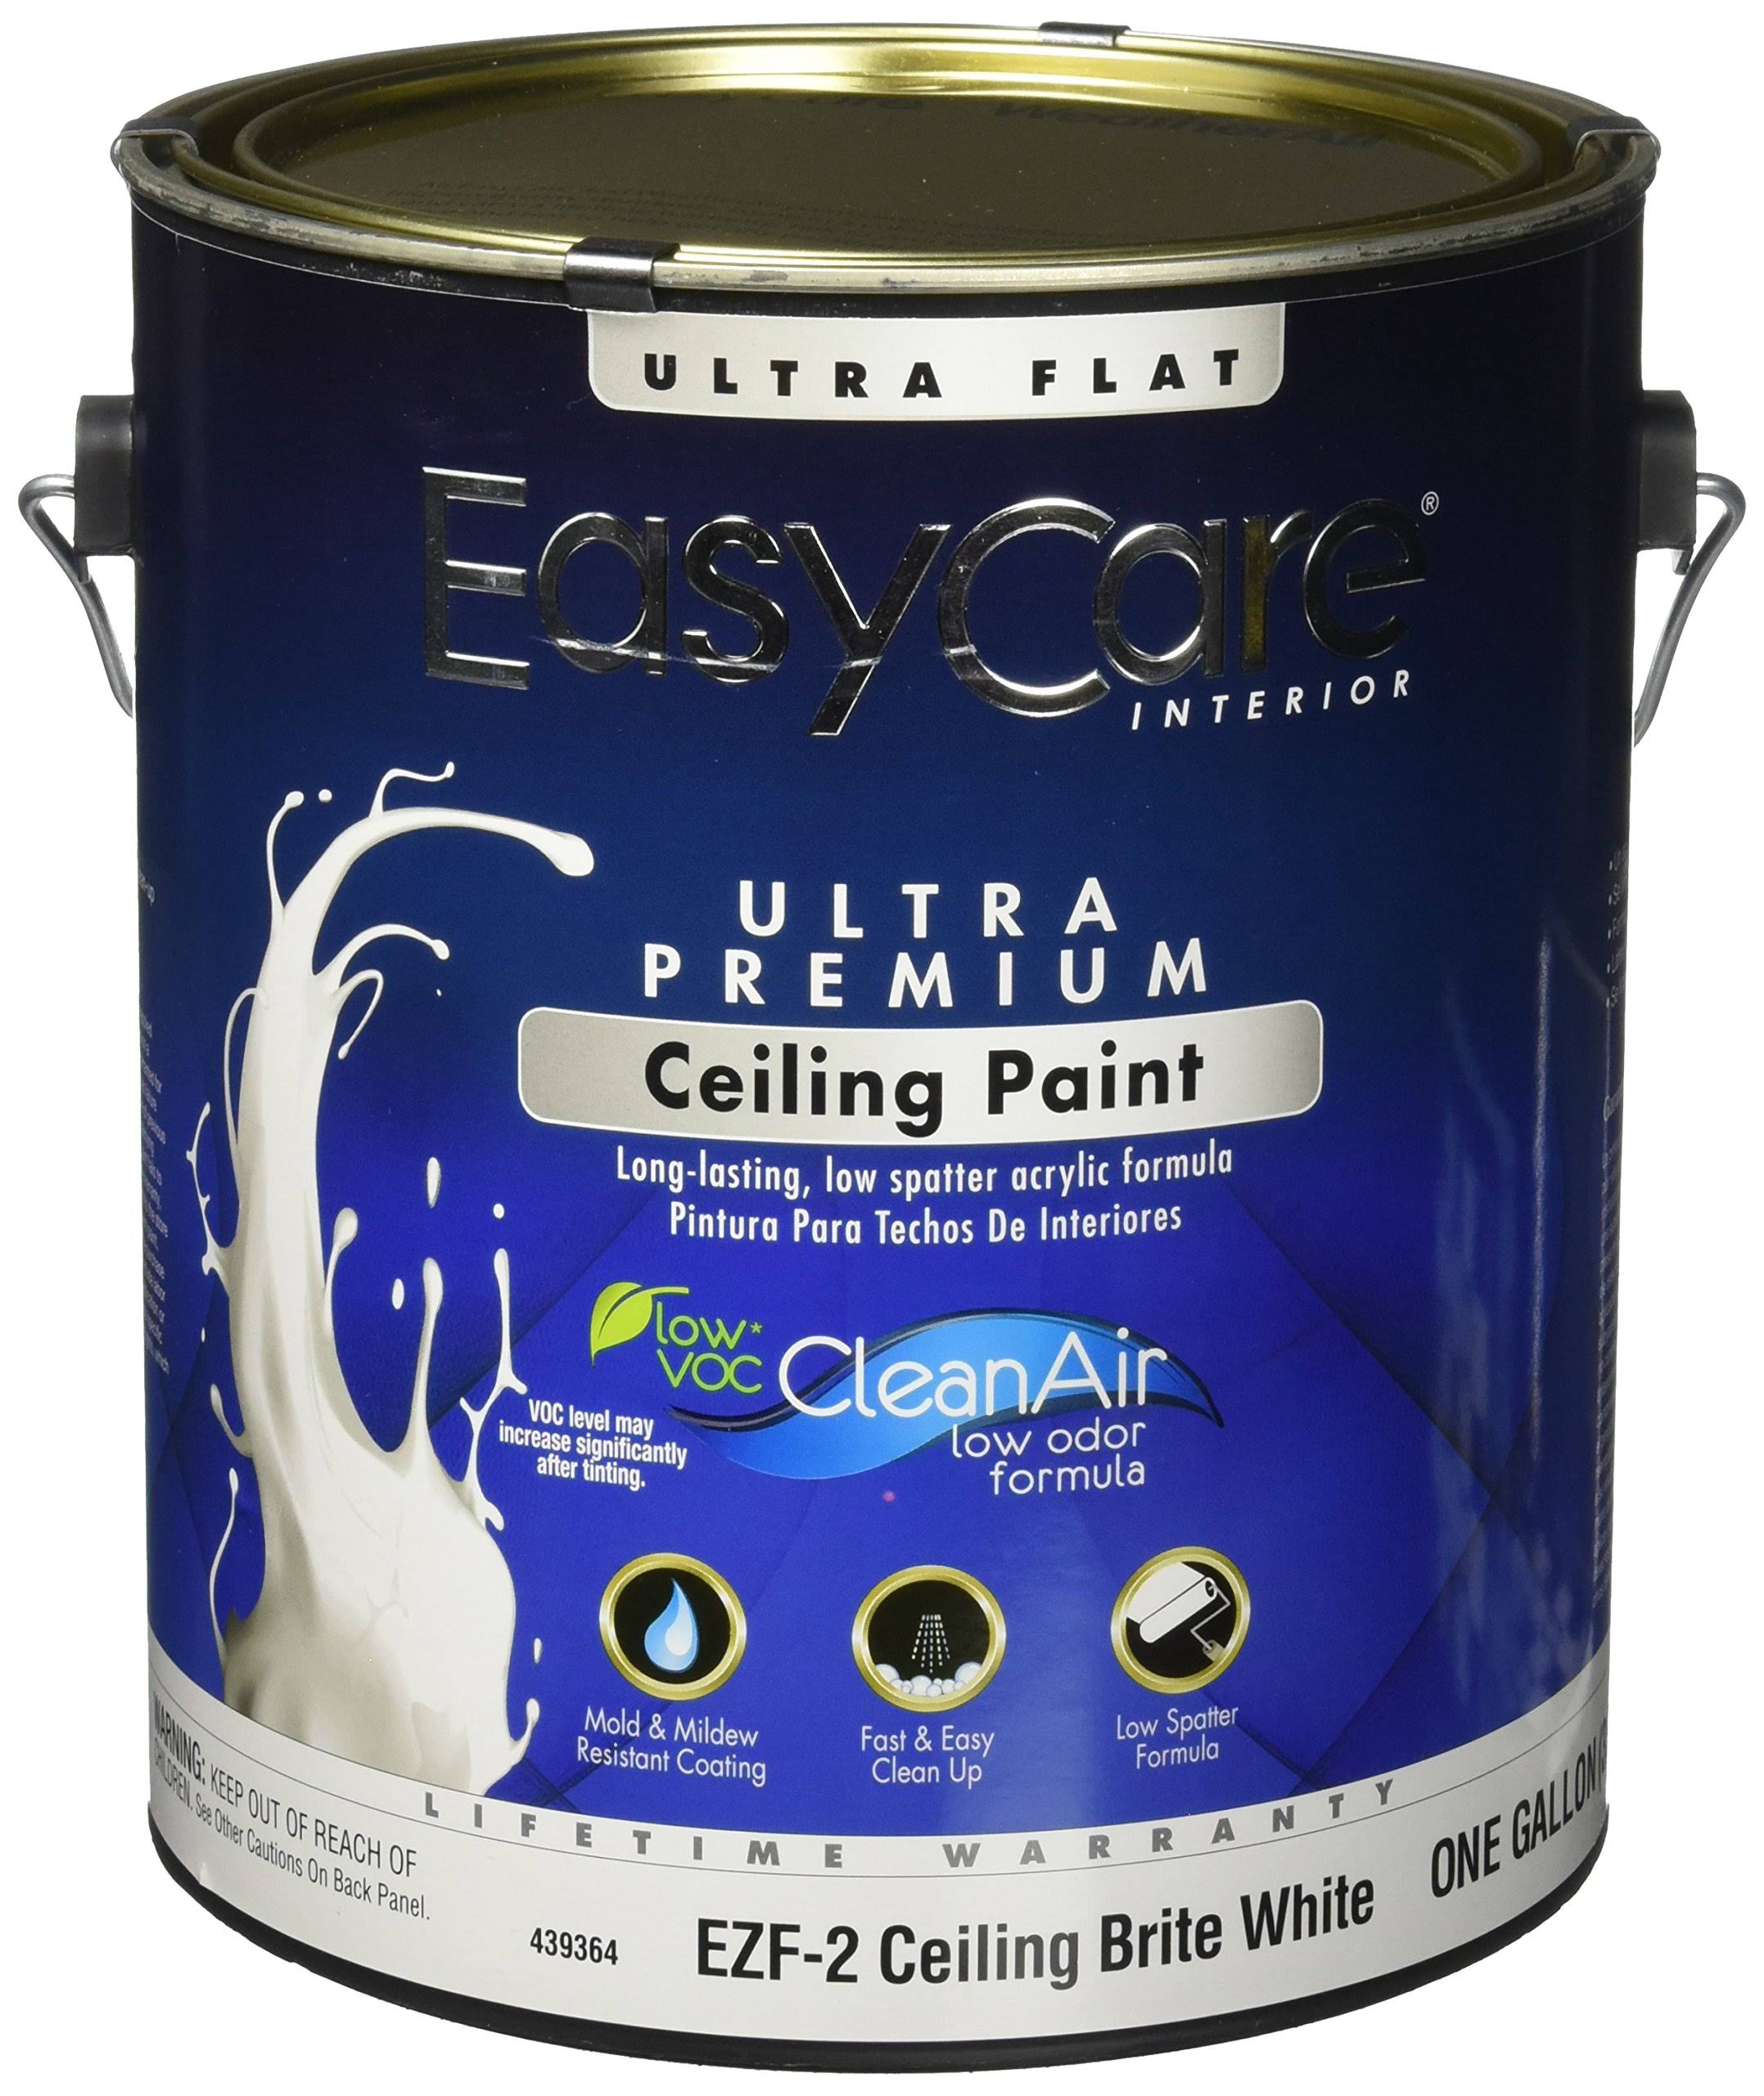 True Value Manufacturing Easy Care Ceiling Paint - White